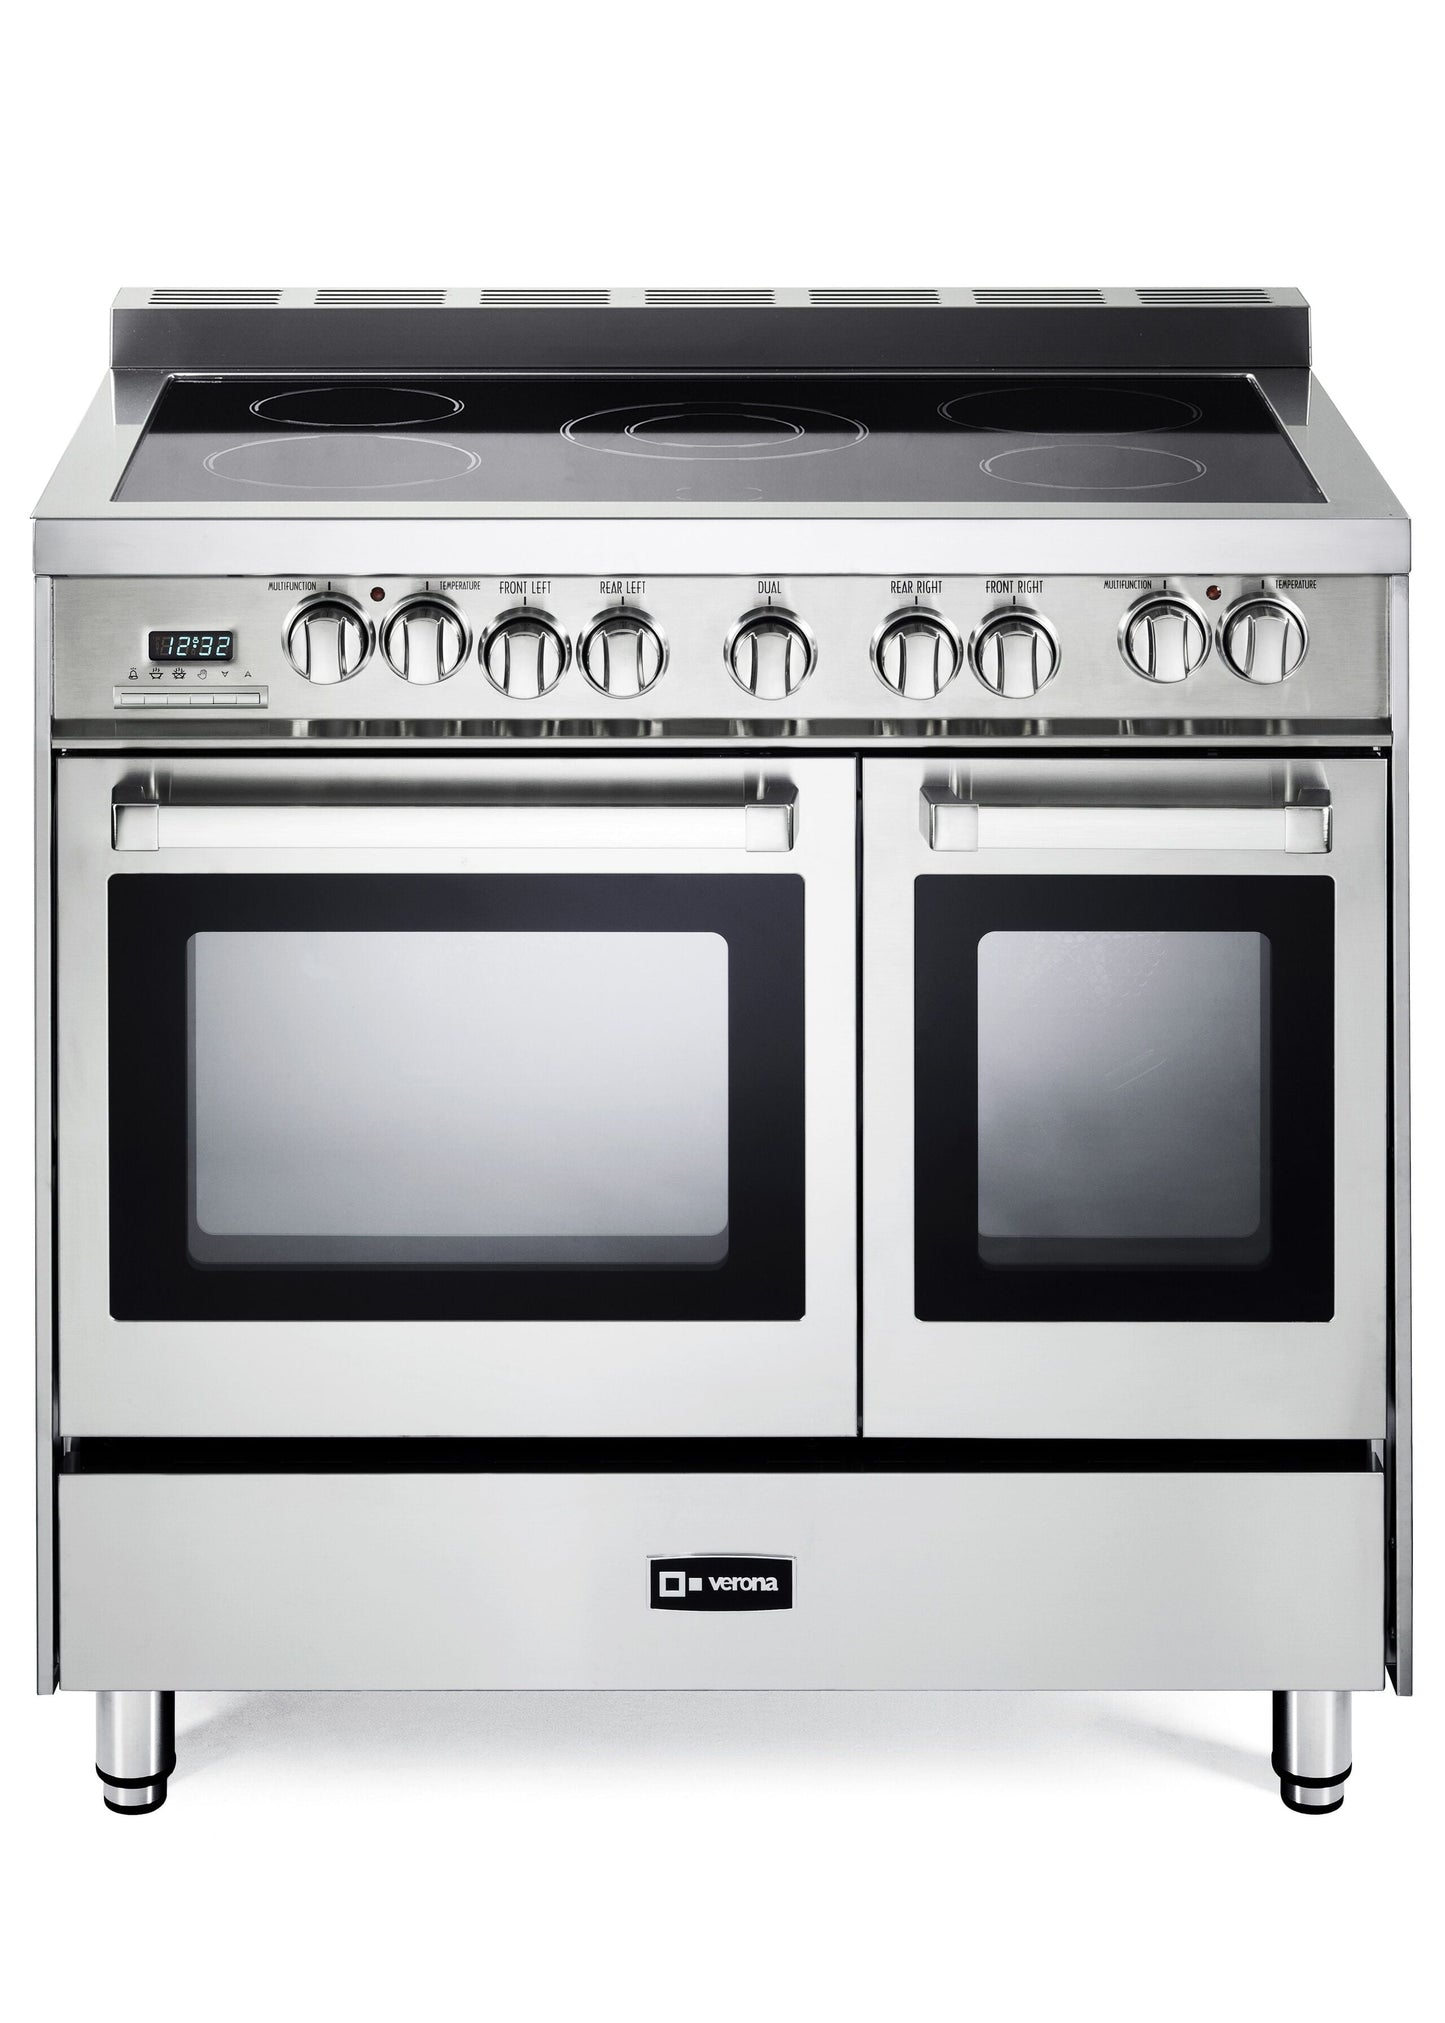 Verona VEFSEE365DSS Stainless Steel 36" Electric Double Oven Range